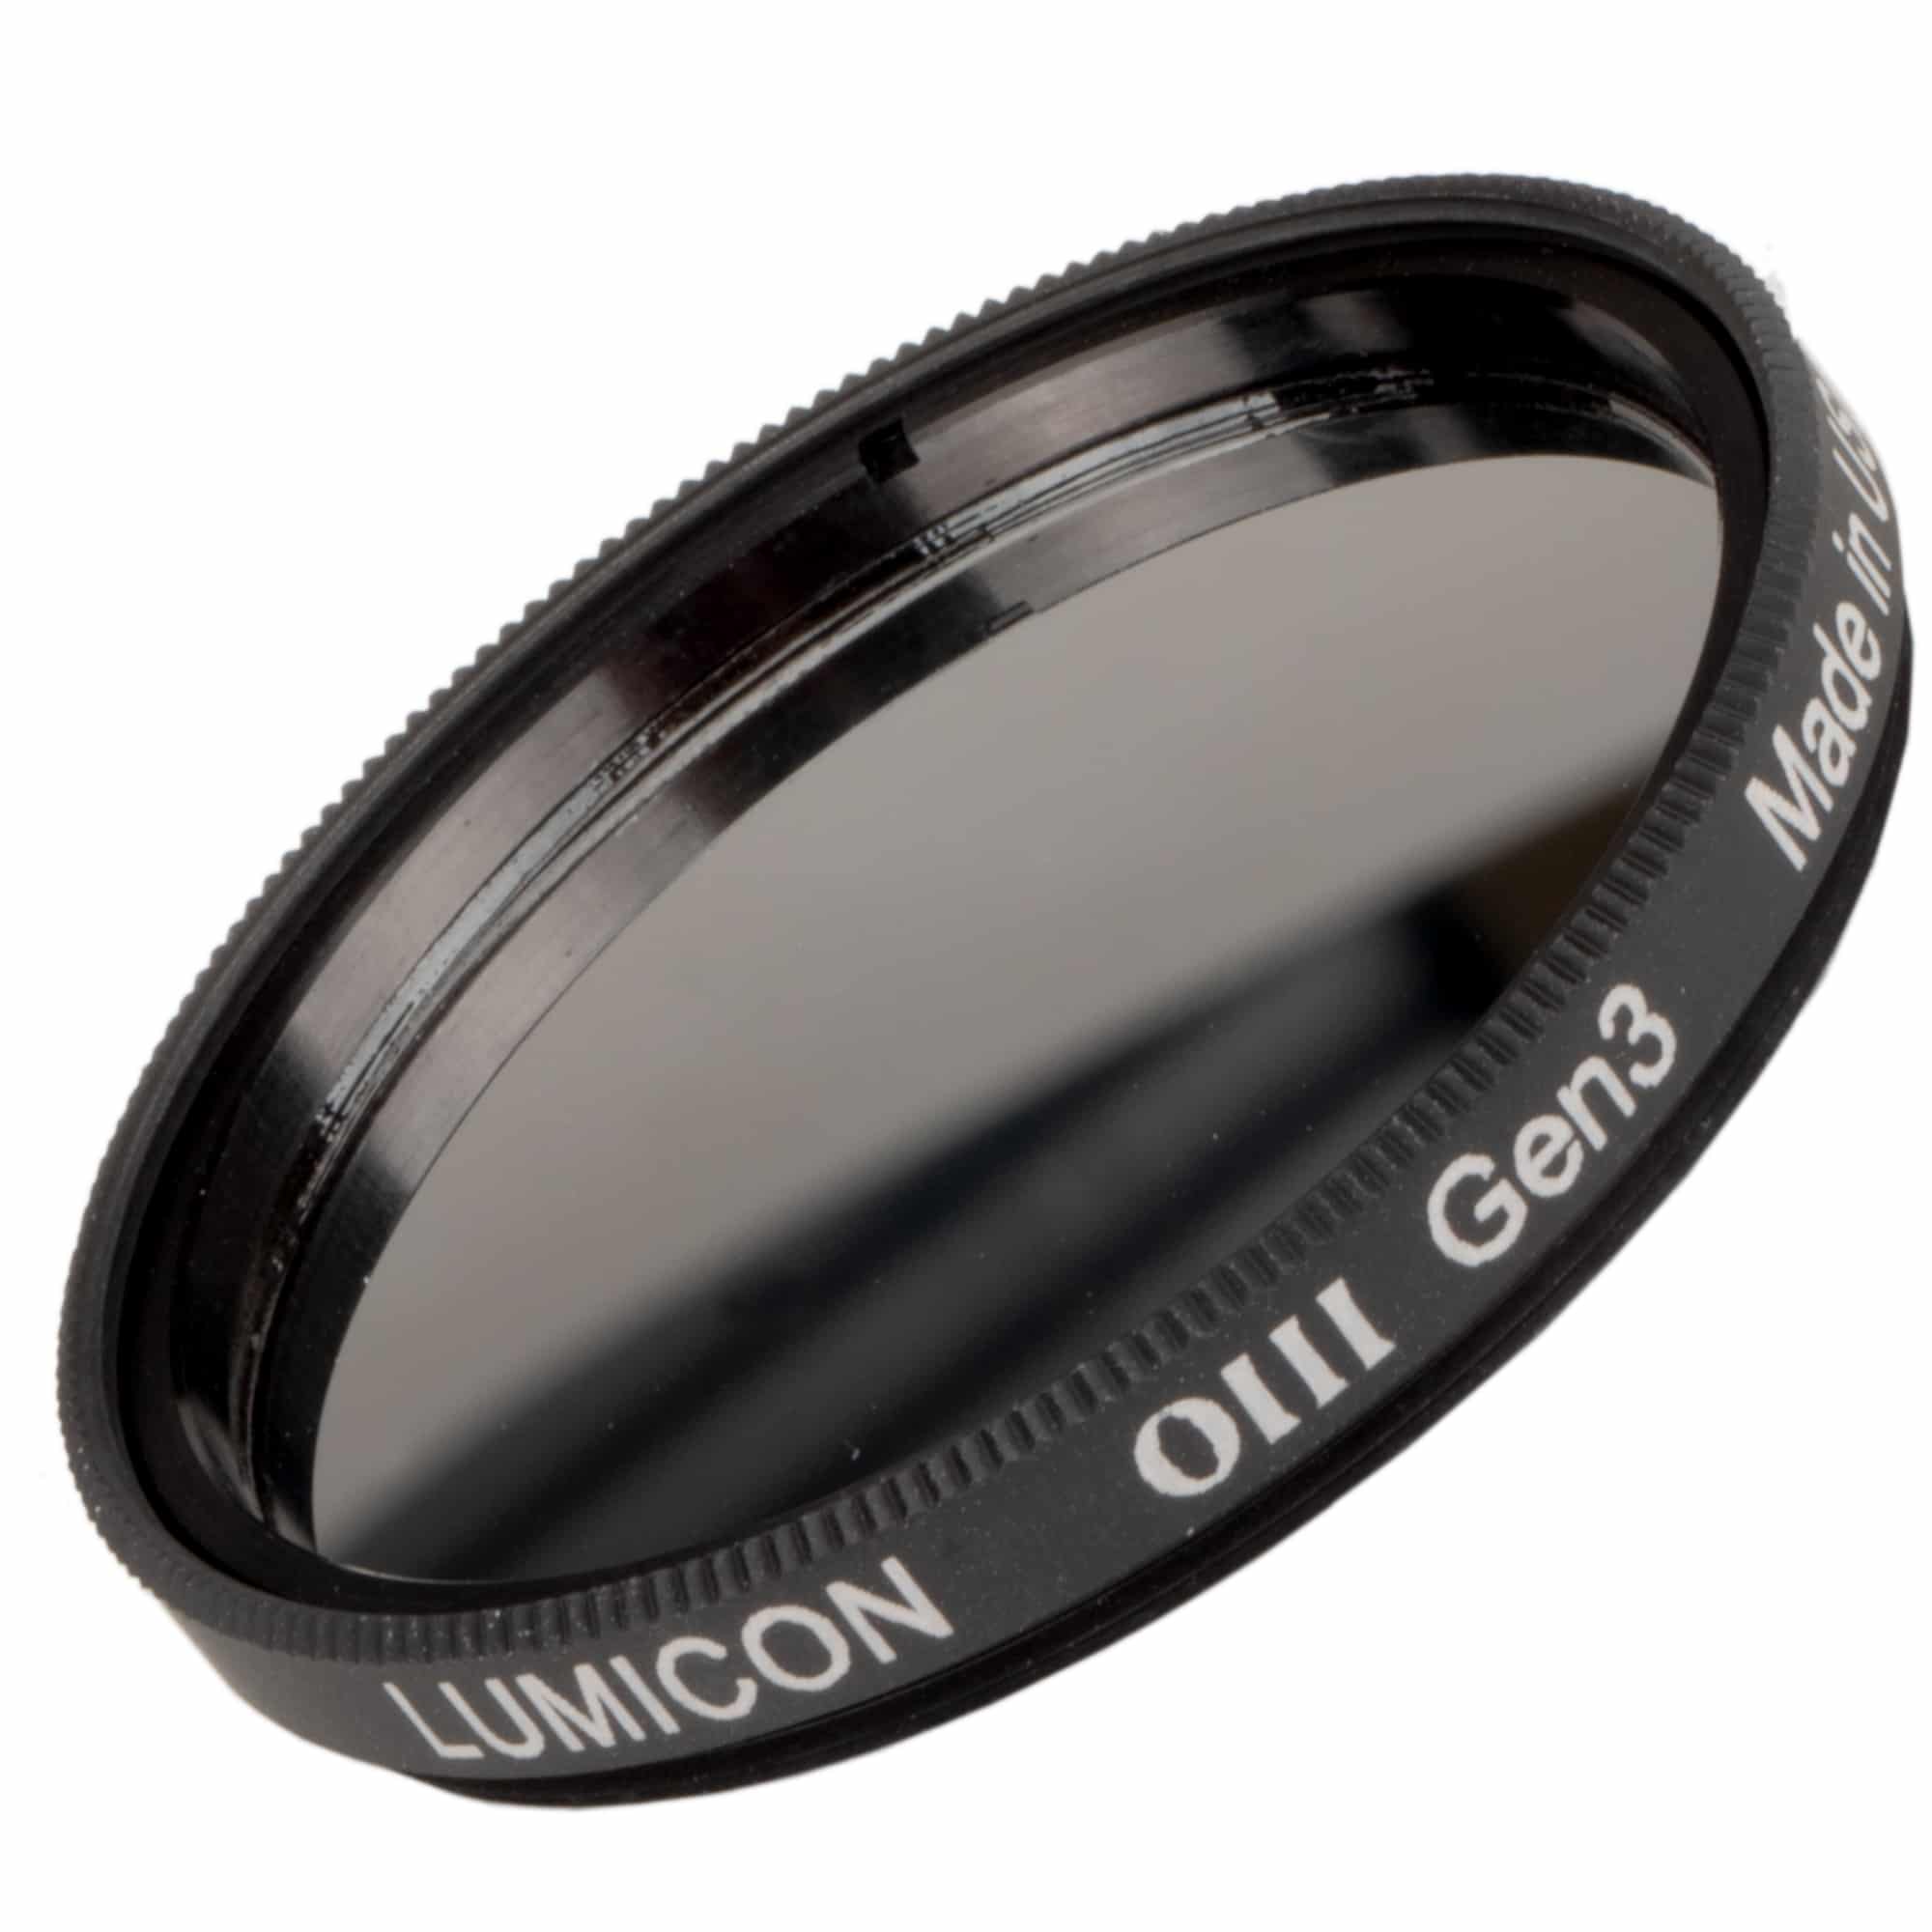 Classic Lumicon 2 Inch Oxygen III Filter (2nd Quality)